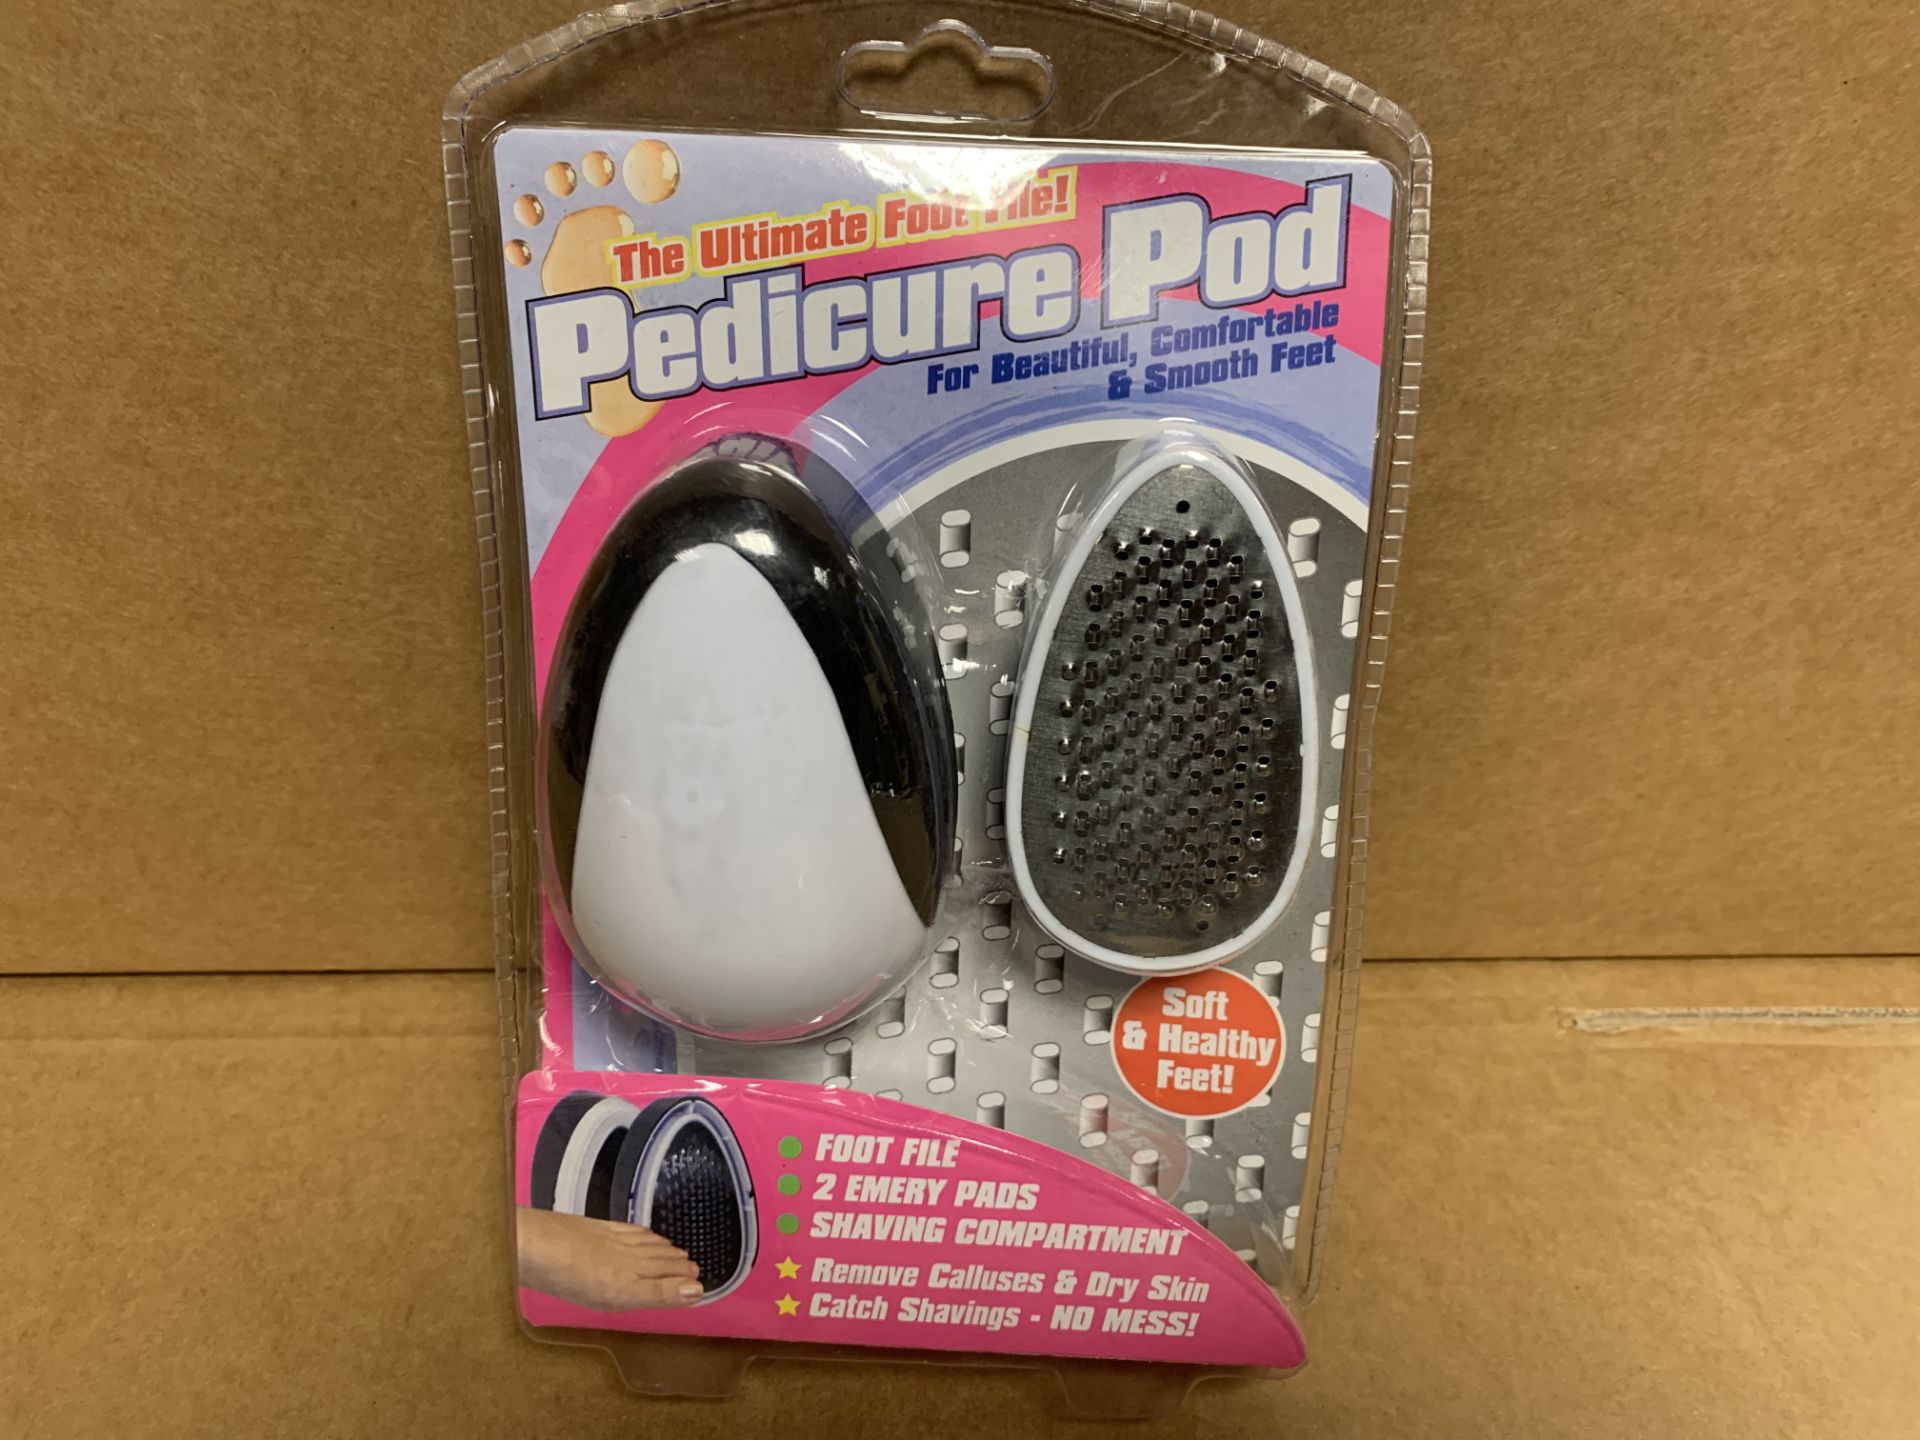 72 x NEW PACKAGED PEDICURE POD - THE ULTIMATE FOOT FILE. RRP £4.99 EACH